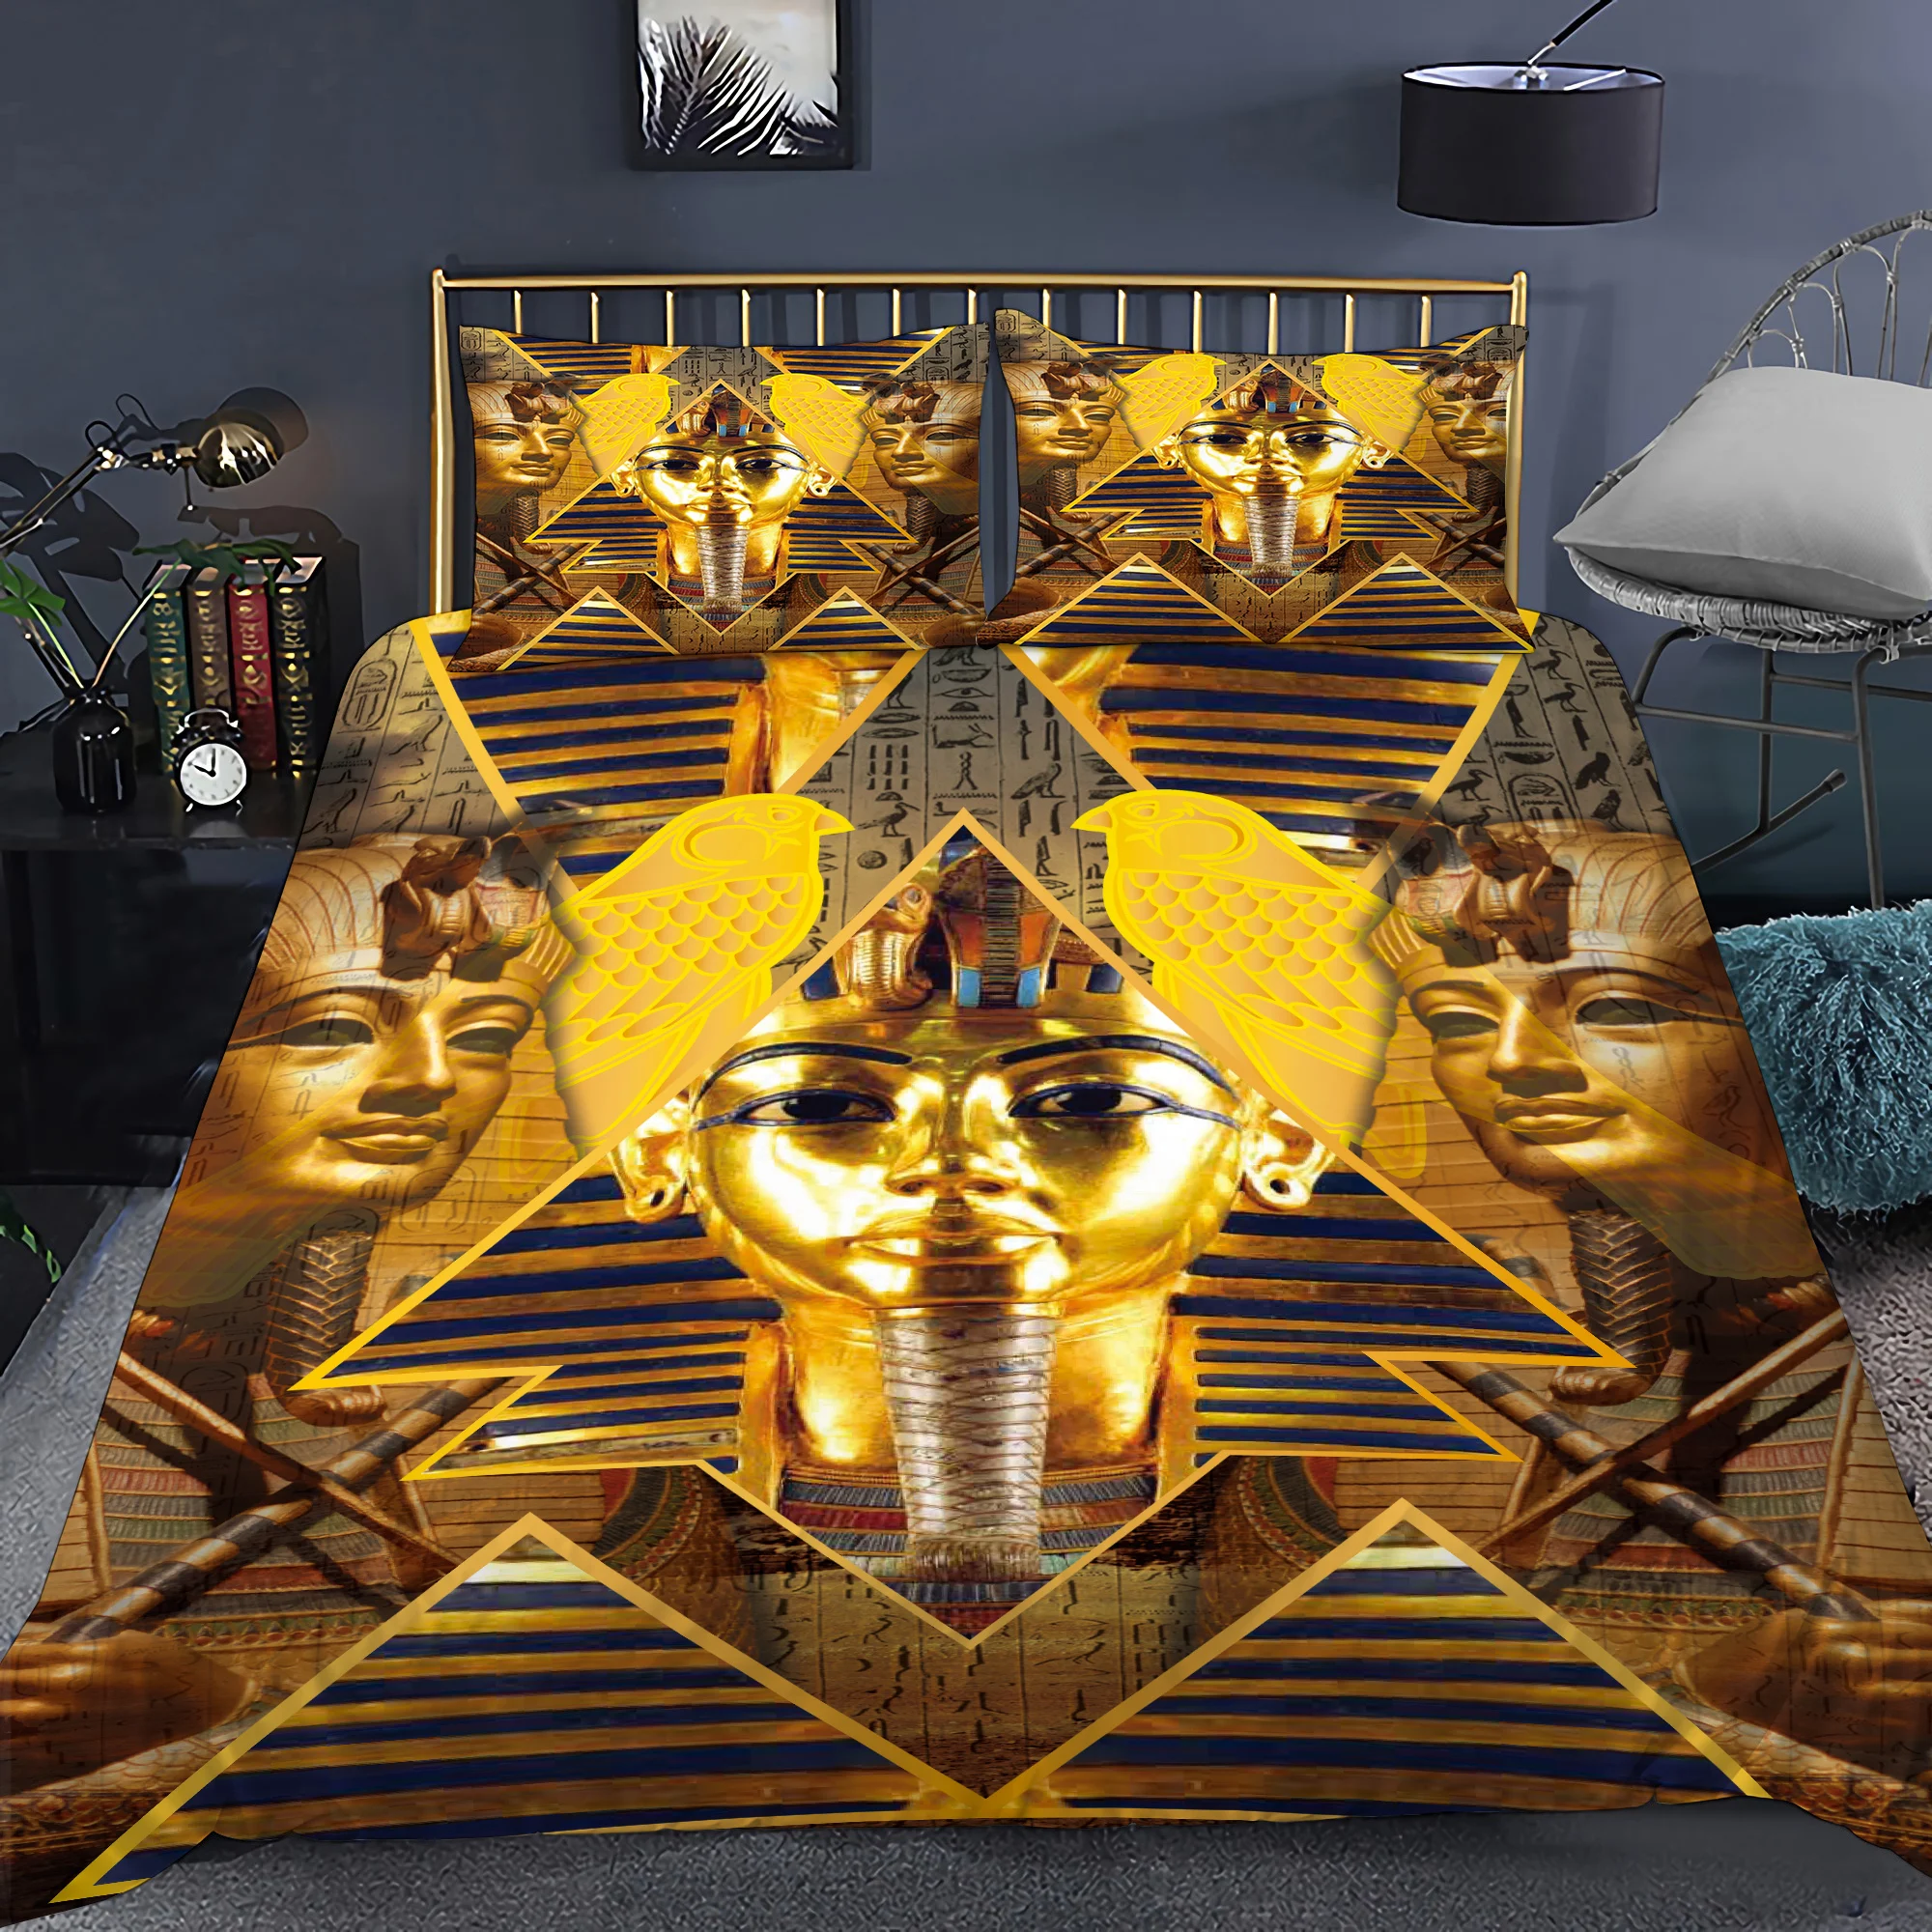 

New Pharaoh Bedding Sets 3D Ancient Egypt Tribe Decor Comforter Cover Set for Bedroom Egyptian Pyramids Exotic Style Duvet Cover